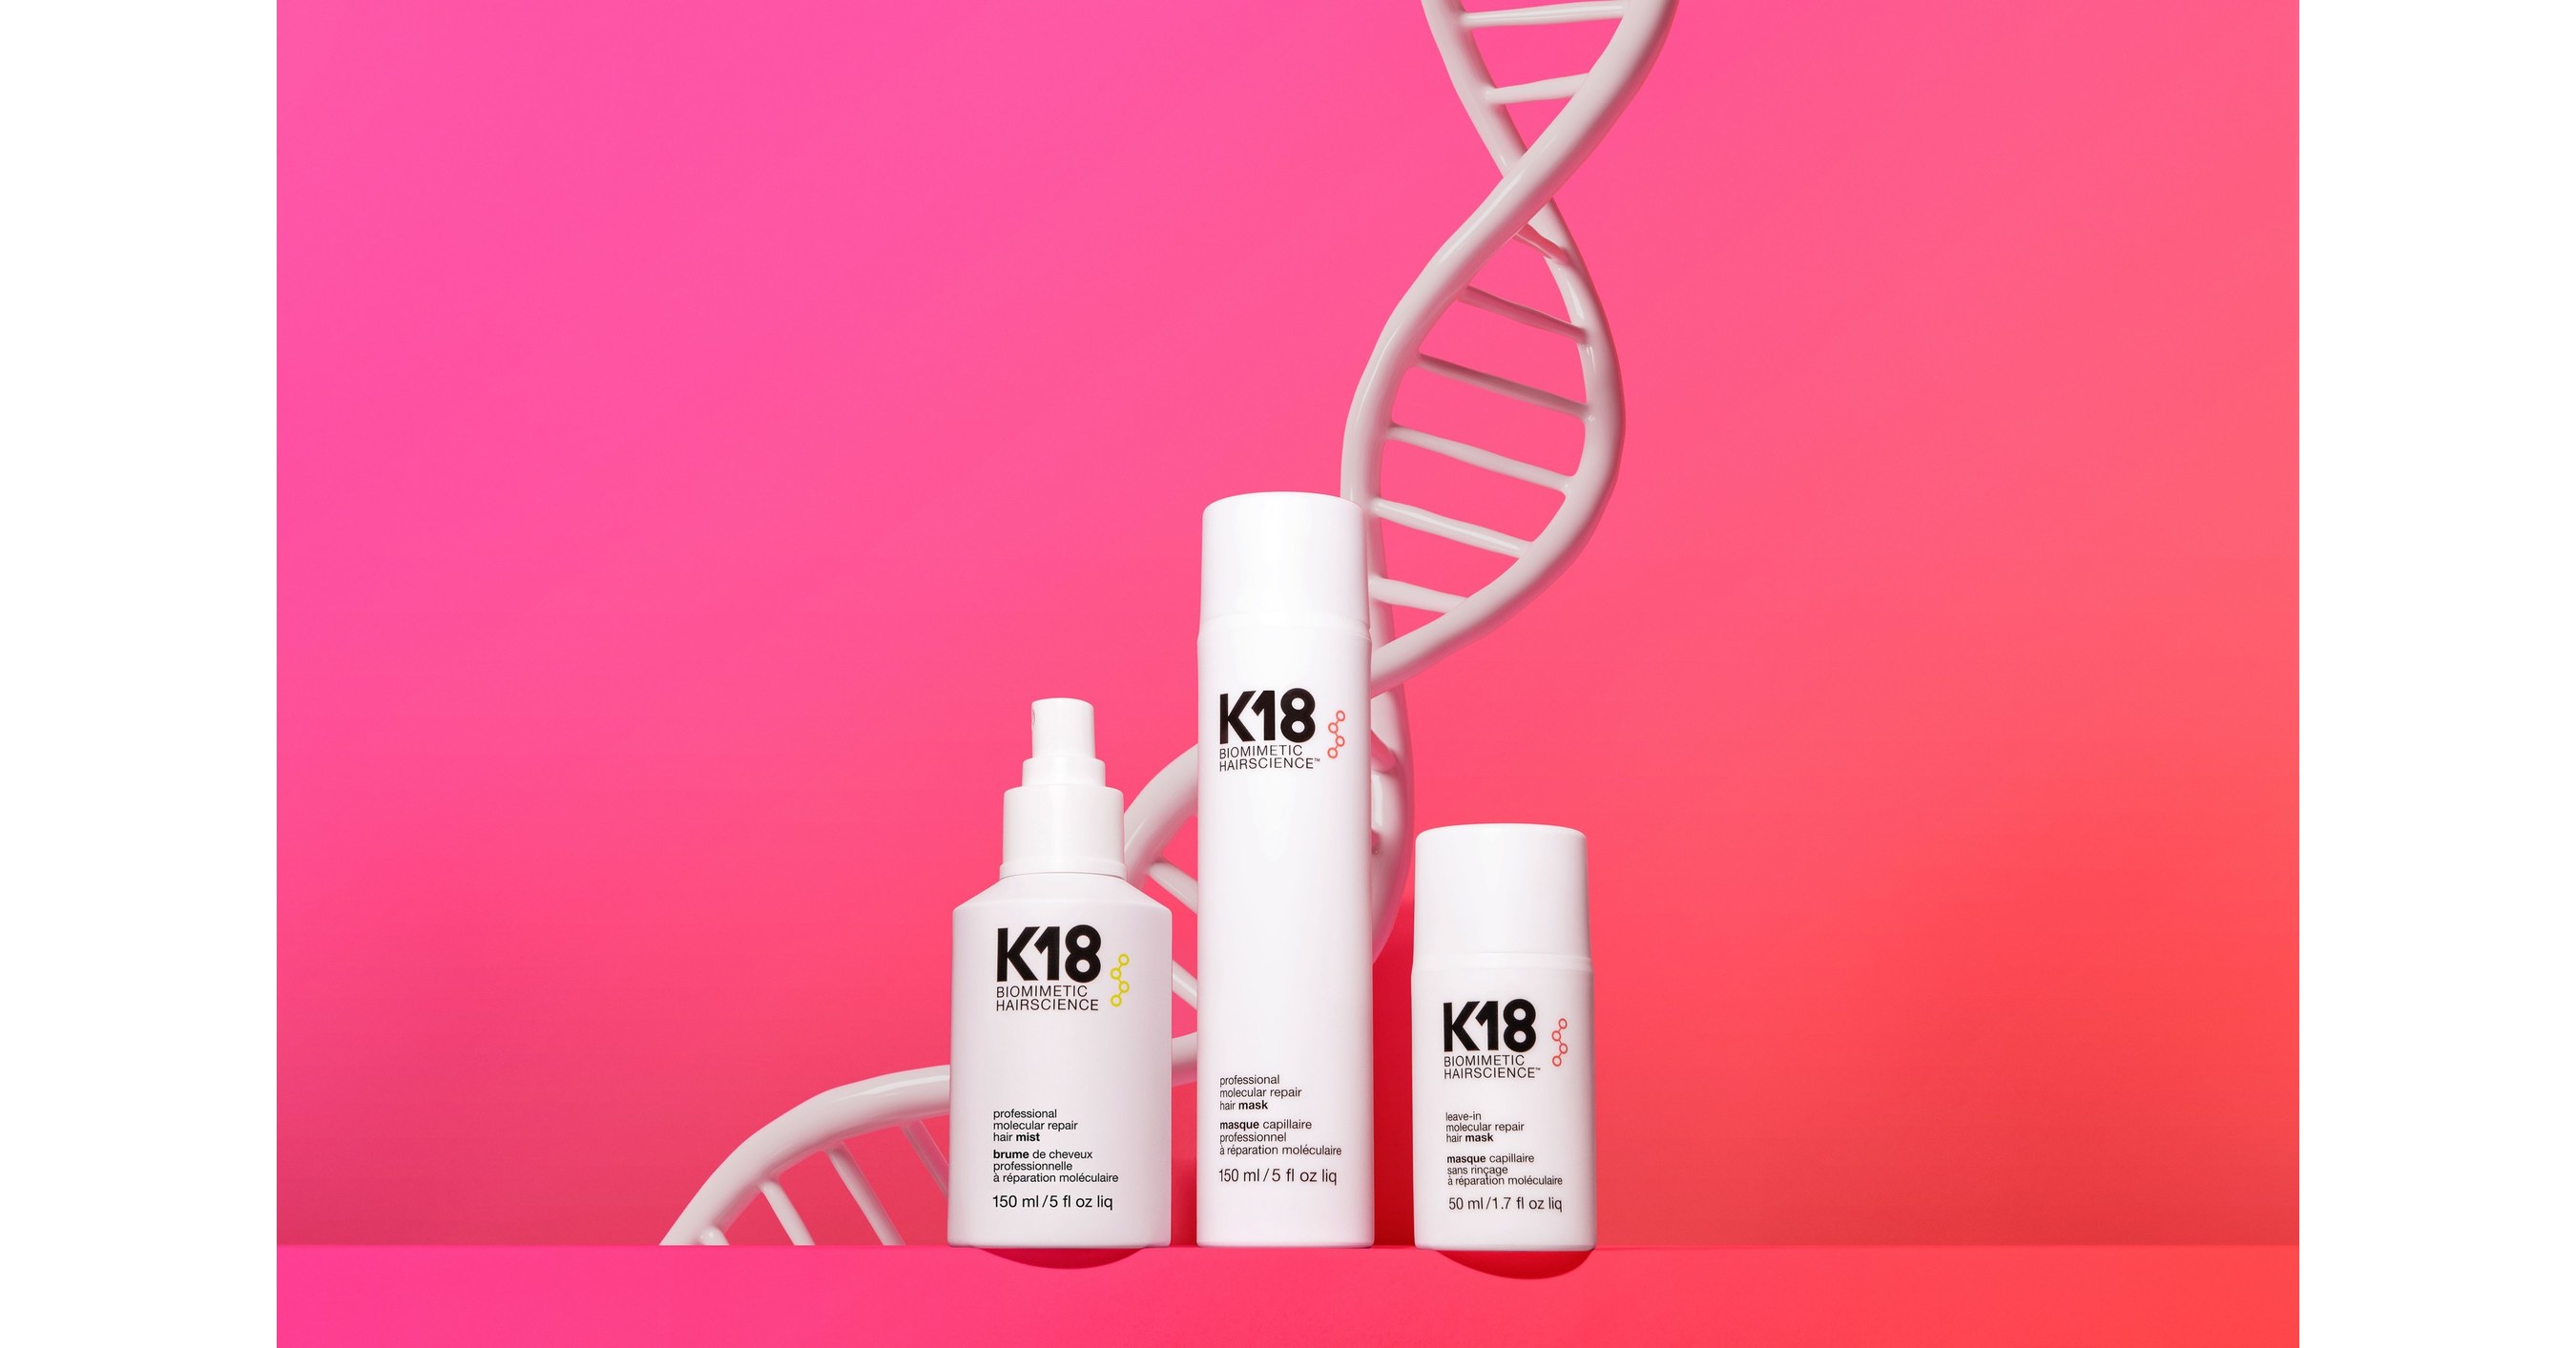 HAIRCARE DISRUPTOR K18 LAUNCHES AT SALONCENTRIC TO FURTHER CHAMPION THE PROFESSIONAL STYLING COMMUNITY